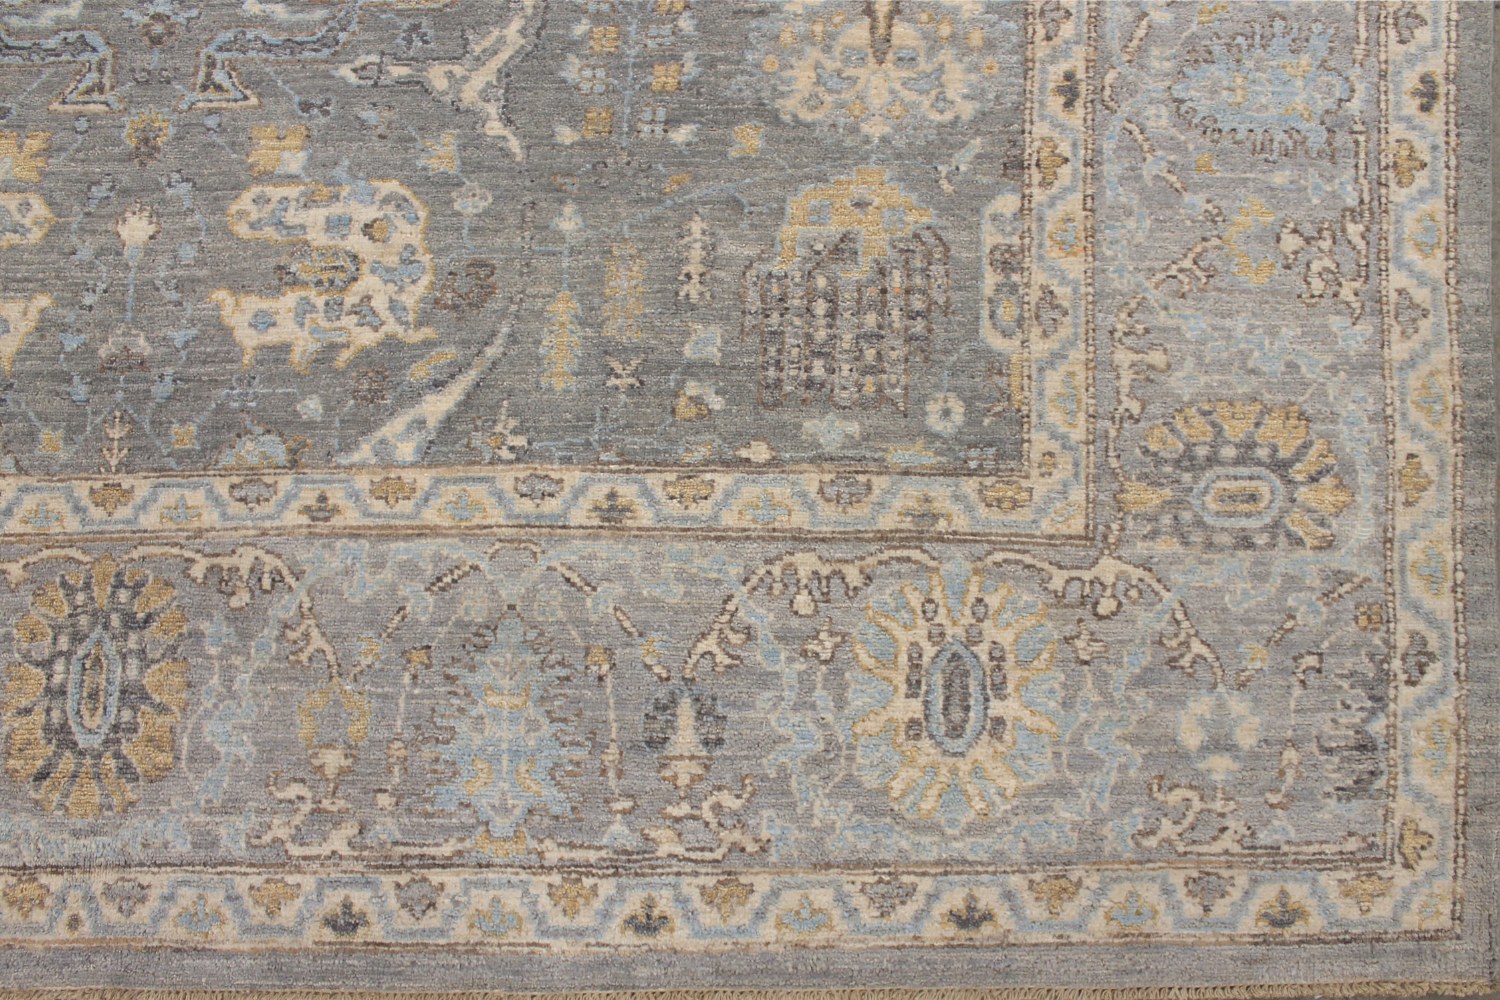 8x10 Peshawar Hand Knotted Wool Area Rug - MR027812